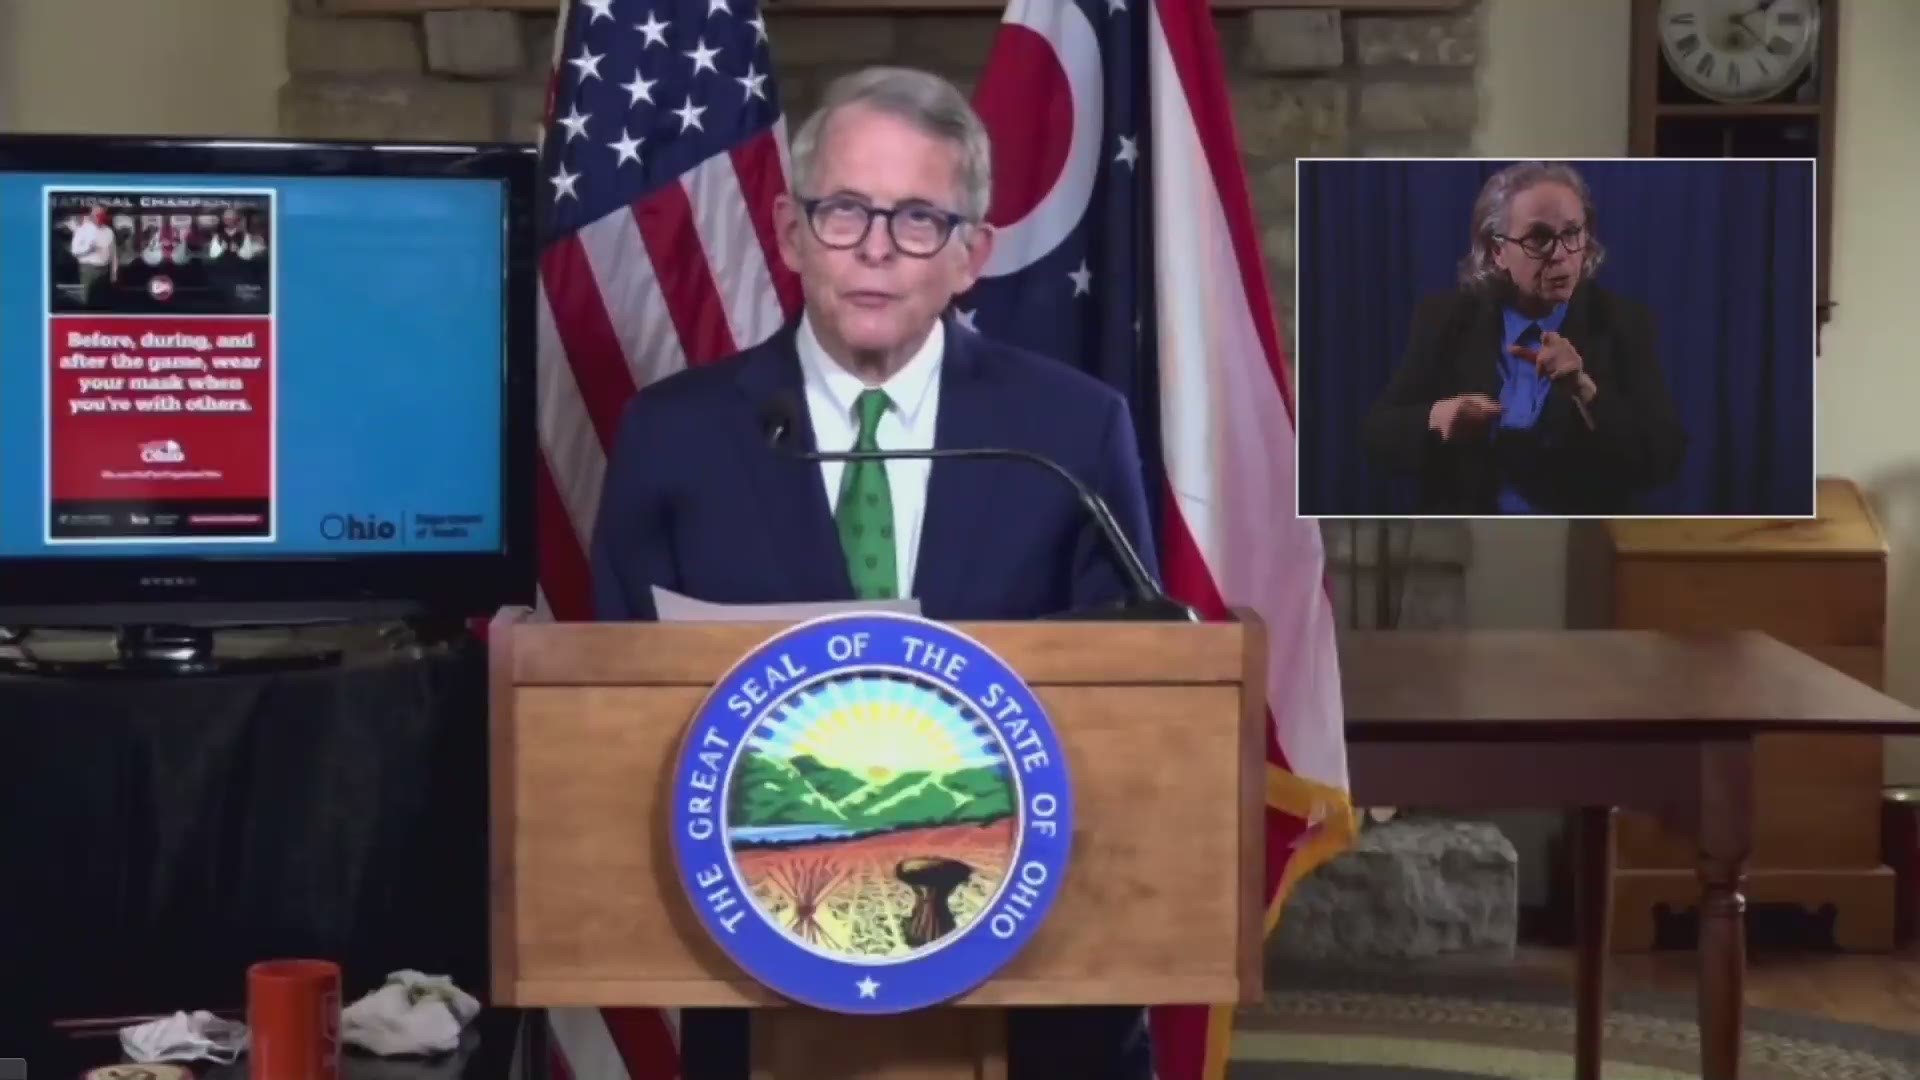 On Tuesday, Ohio Governor Mike DeWine offered guidance for counties currently experiencing surging coronavirus trends.